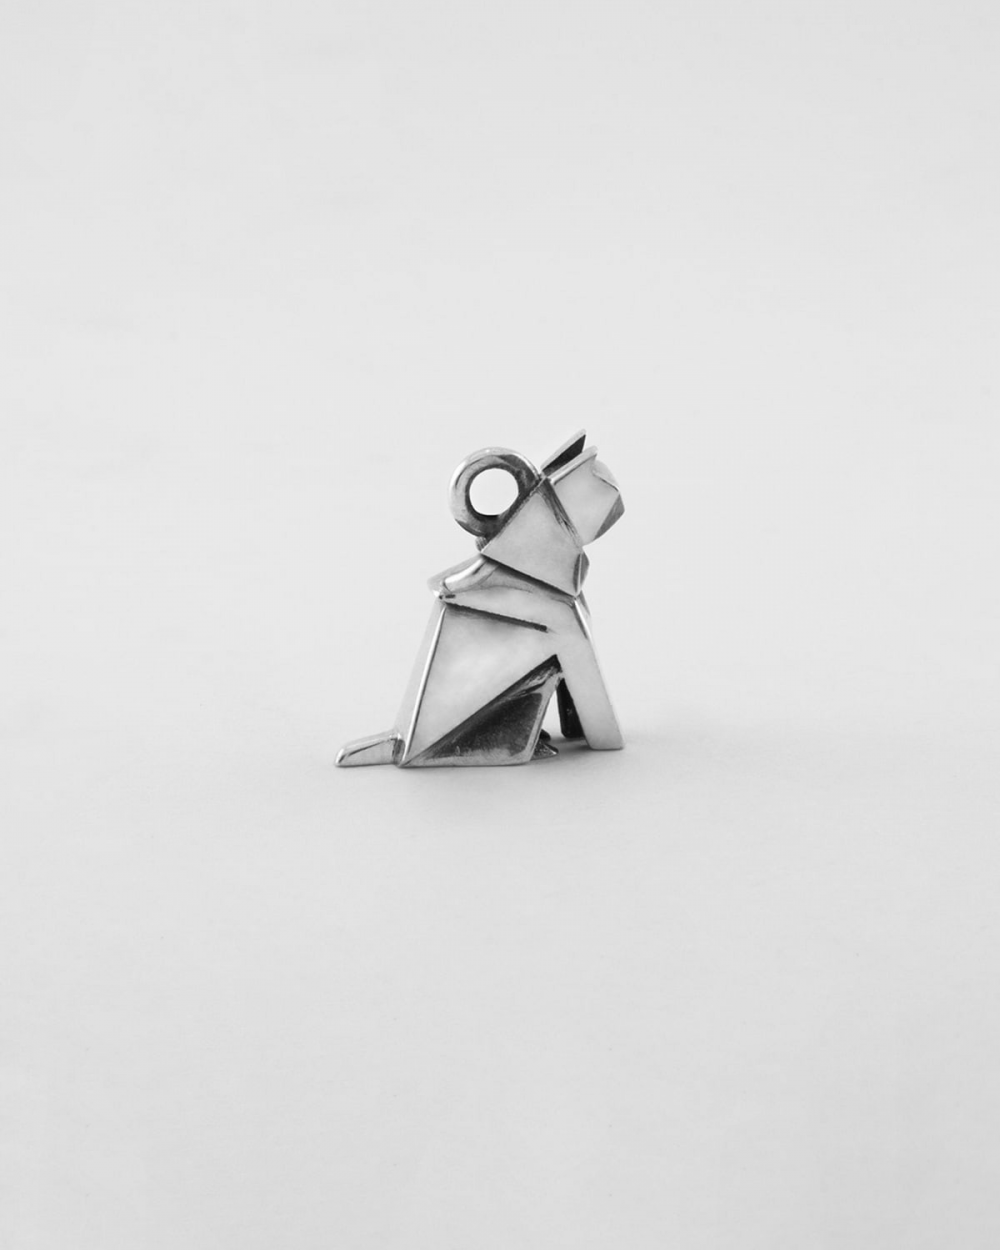 ORIGAMI CAT "PATIENCE" CHARM / POLISHED RHODIUM PLATED